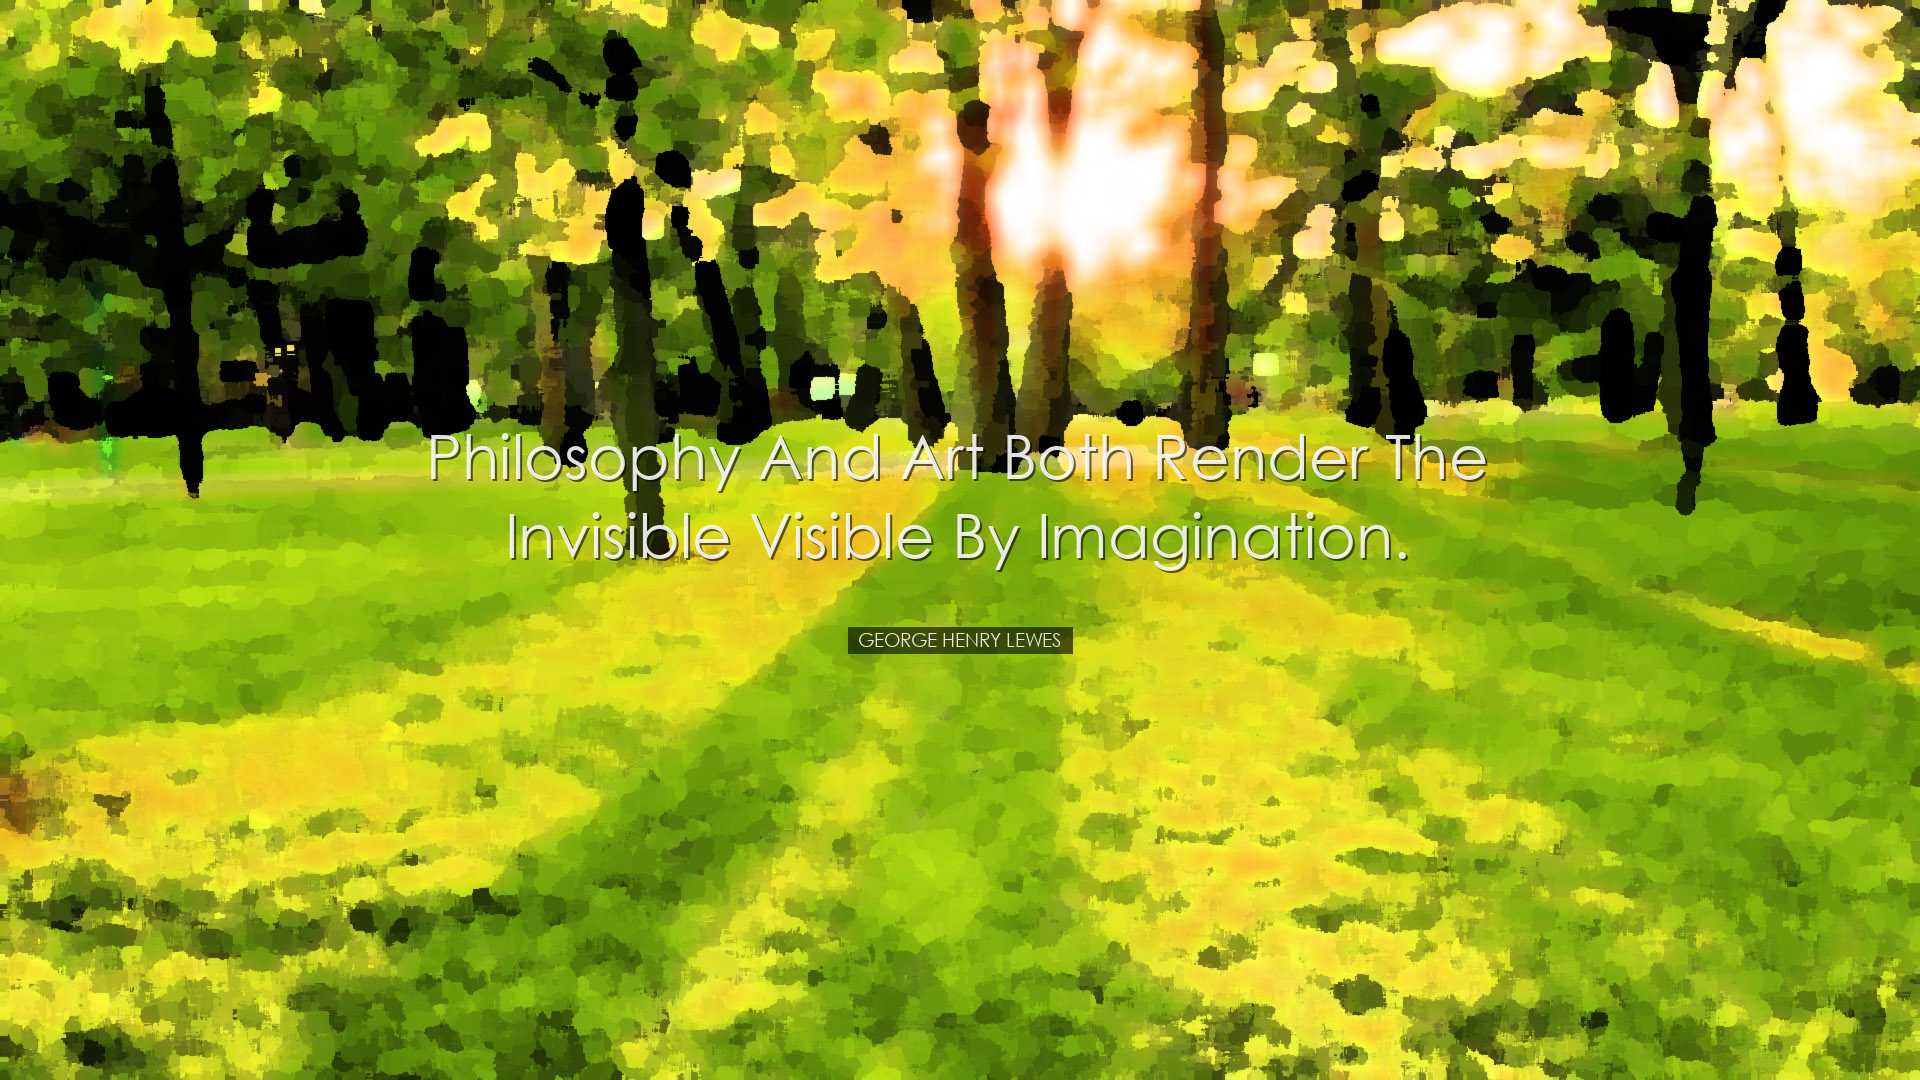 Philosophy and Art both render the invisible visible by imaginatio